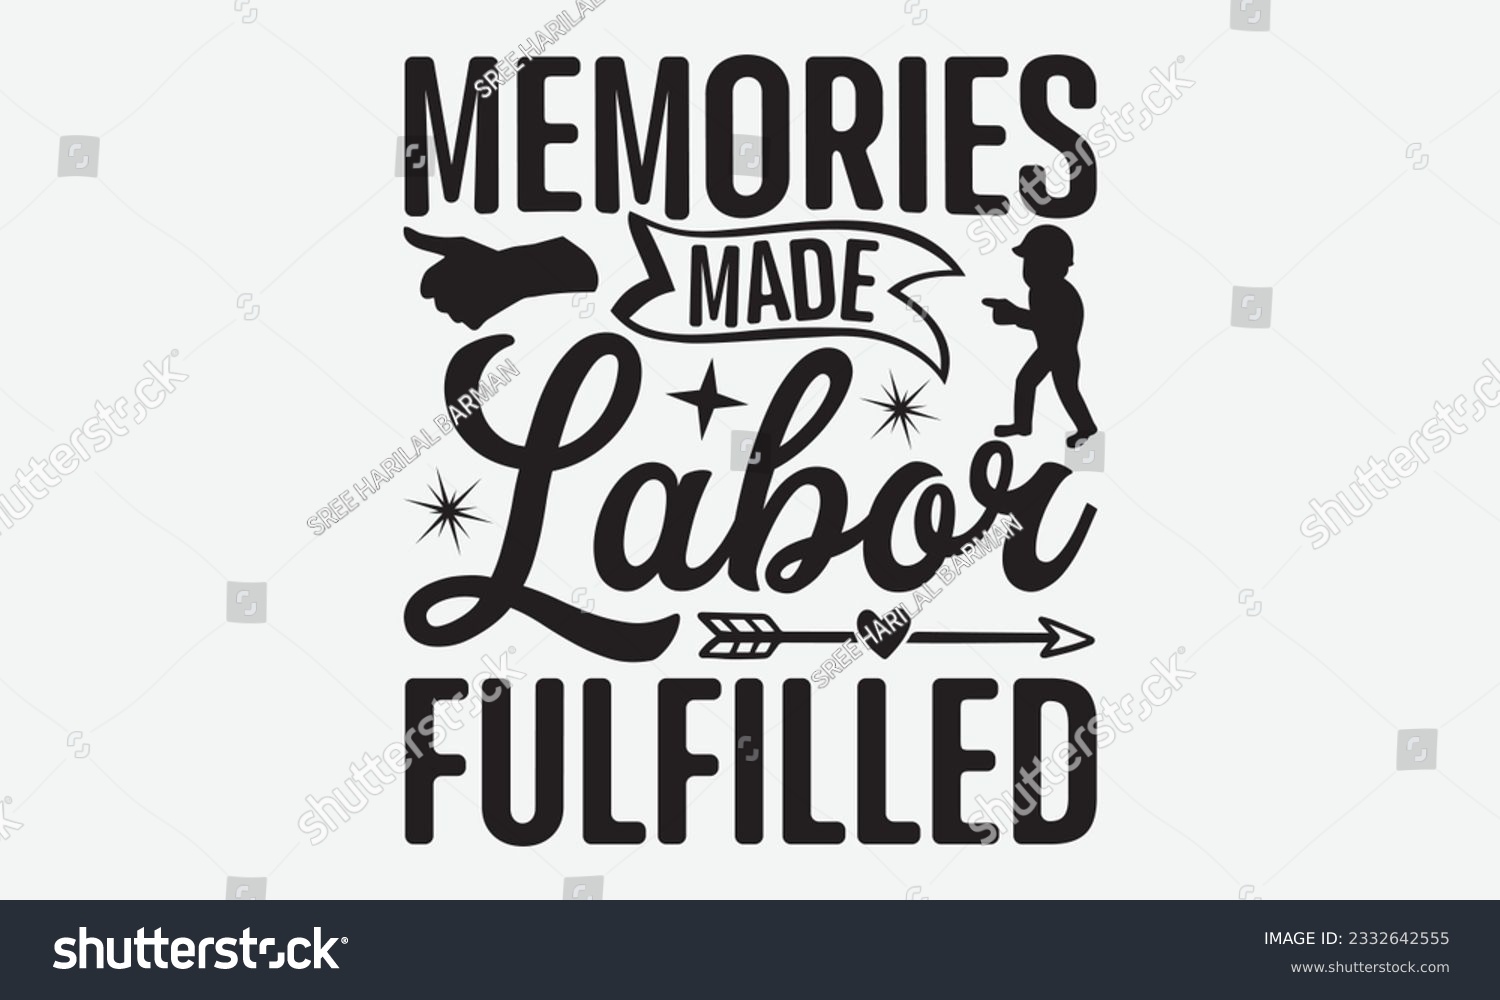 SVG of Memories Made Labor Fulfilled - Labor svg typography t-shirt design. celebration in calligraphy text or font Labor in the Middle East. Greeting cards, templates, and mugs. EPS 10. svg